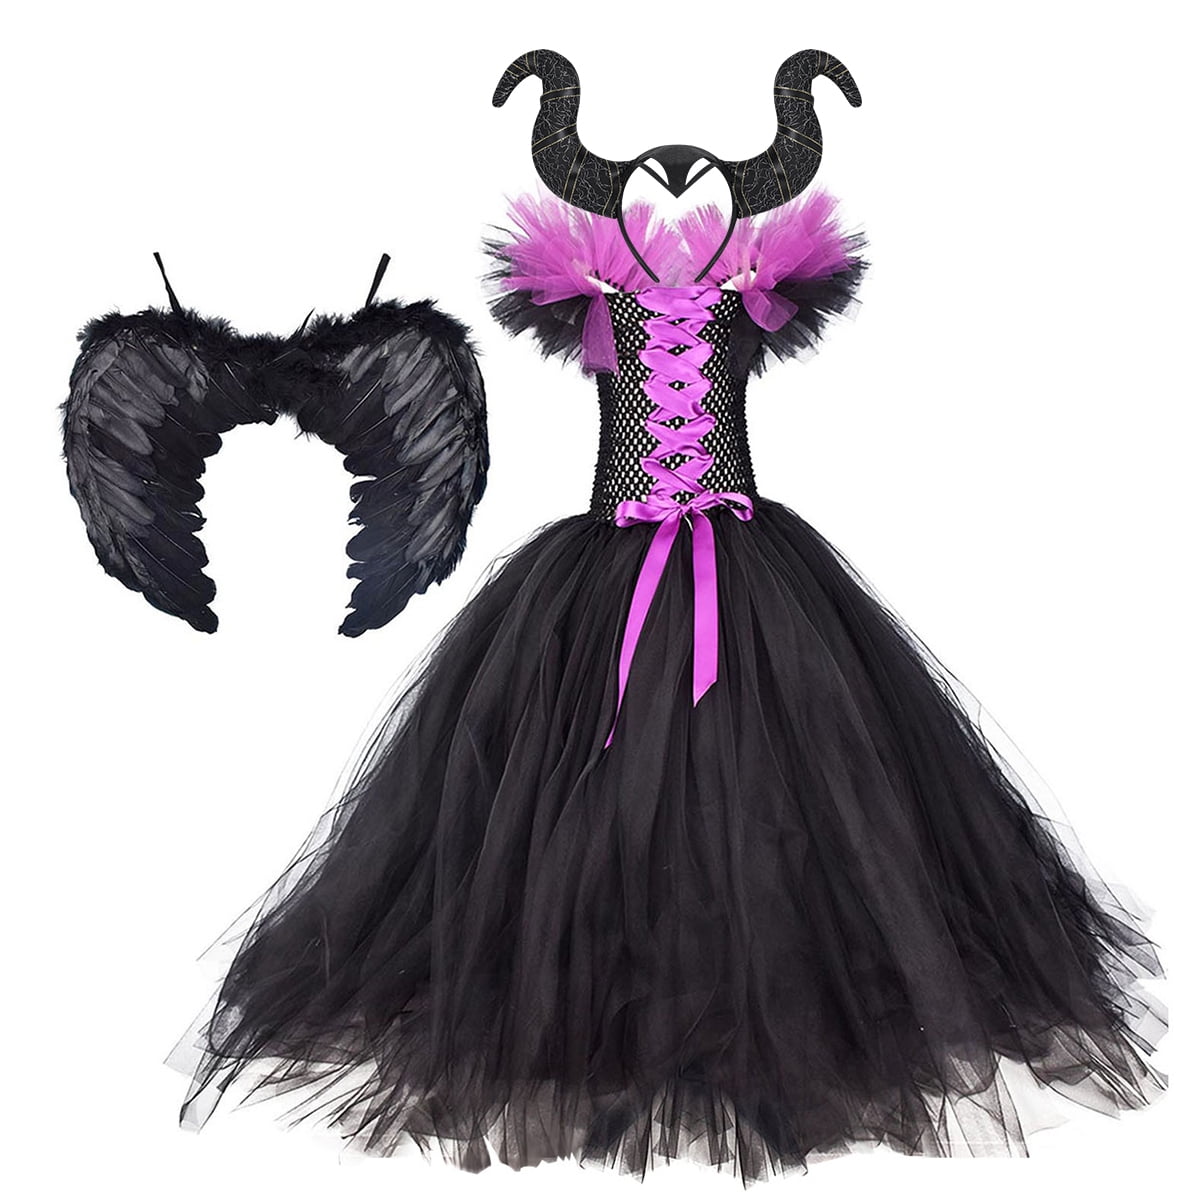 IDOPIP Girls Magnificent Witch Halloween Costume Black Gown with Horns ...